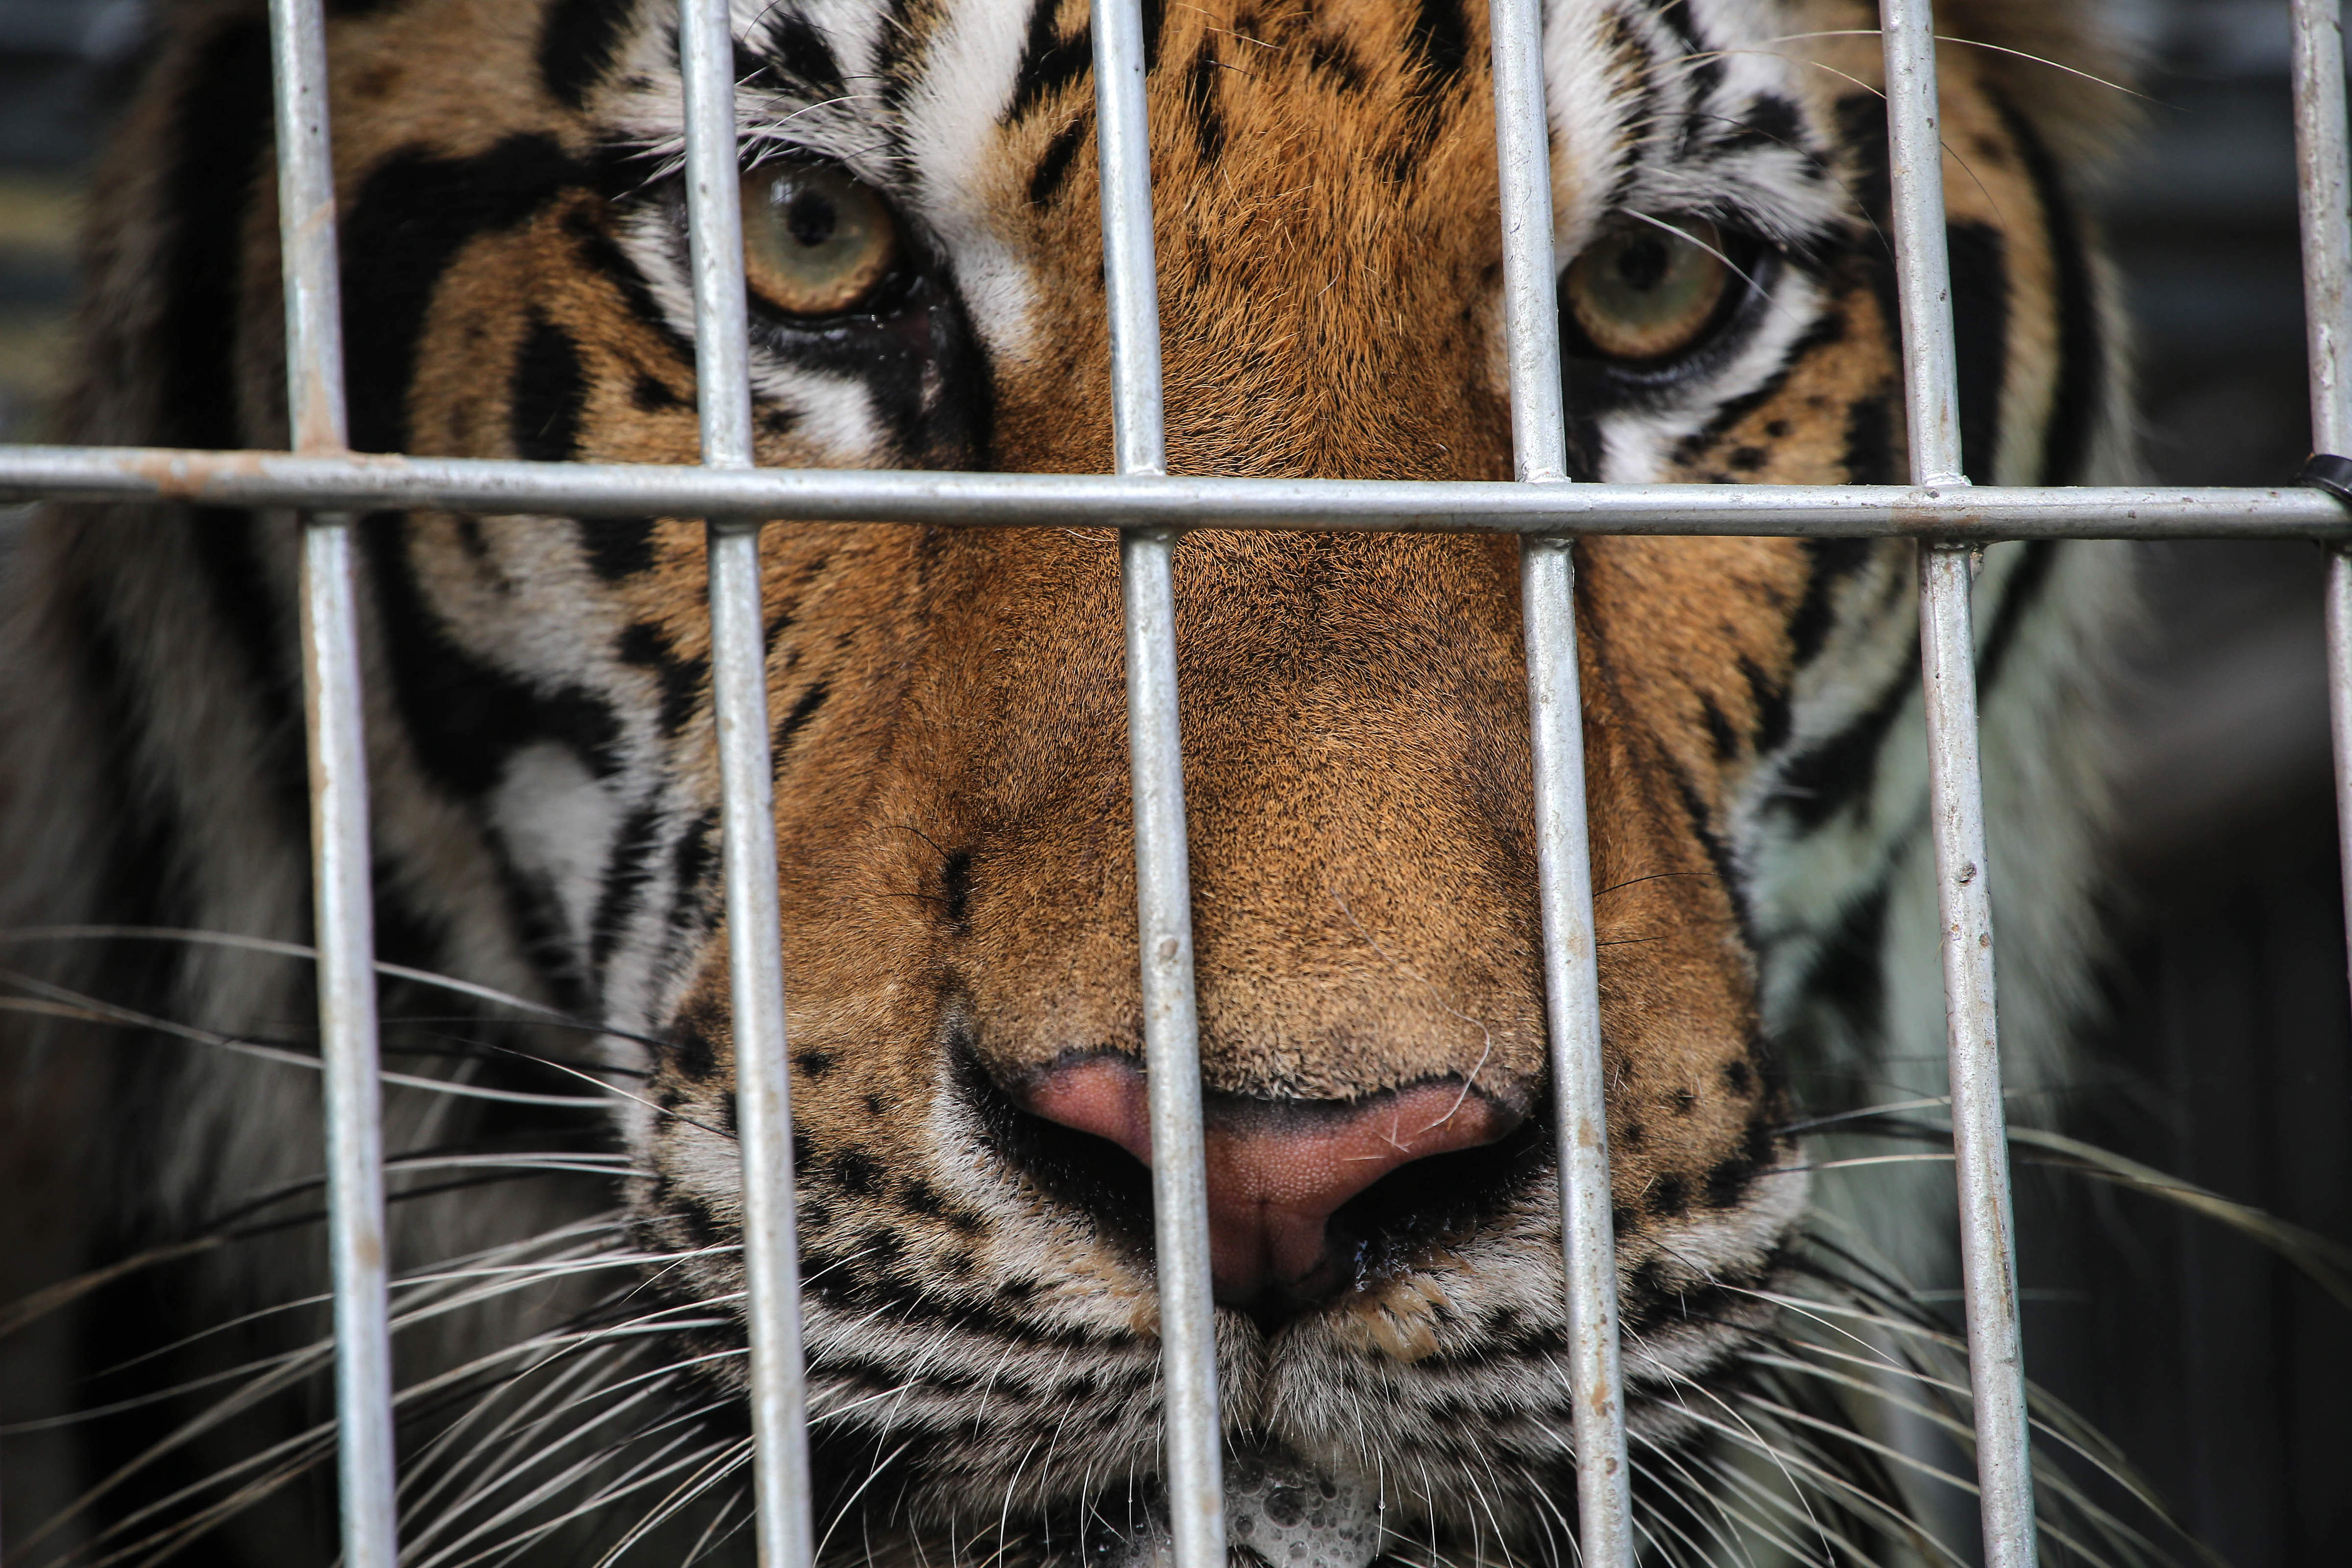 A tiger peers through the bars of its cage at Wat Pha Luang Ta Bua Yanasampanno, or the Tiger Temple, on June 1, 2016, in Kanchanaburi province, Thailand. Wildlife authorities in Thailand raided the Buddhist temple following accusations the monks were illegally breeding and trafficking endangered animals (Dario Pignatelli—Getty Images)